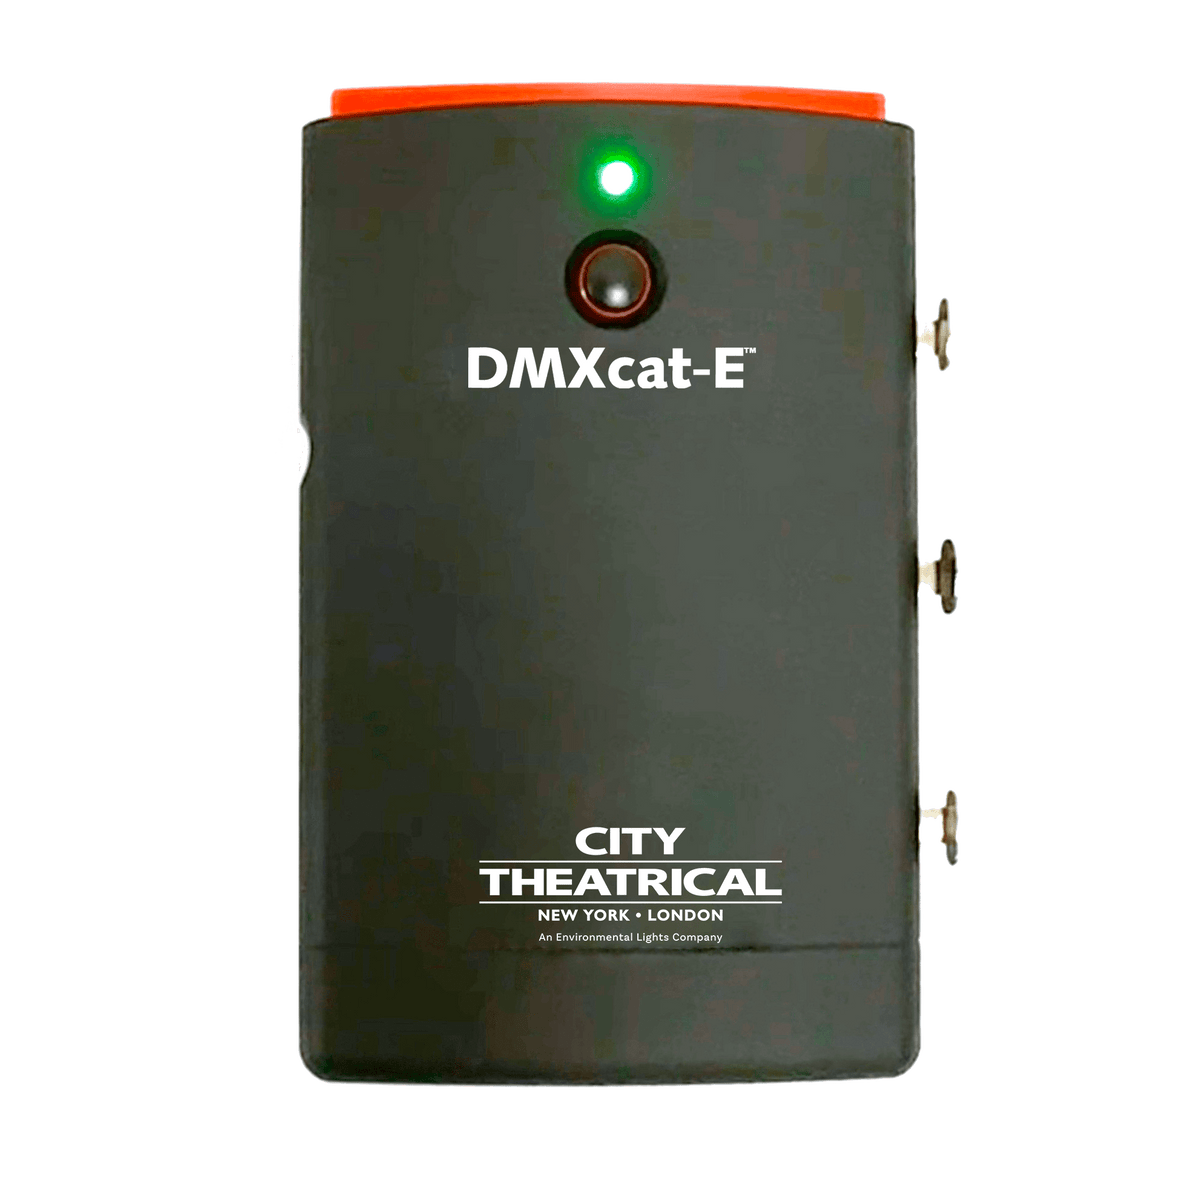 City Theatrical DMXcat-E Multi Function Test Tool